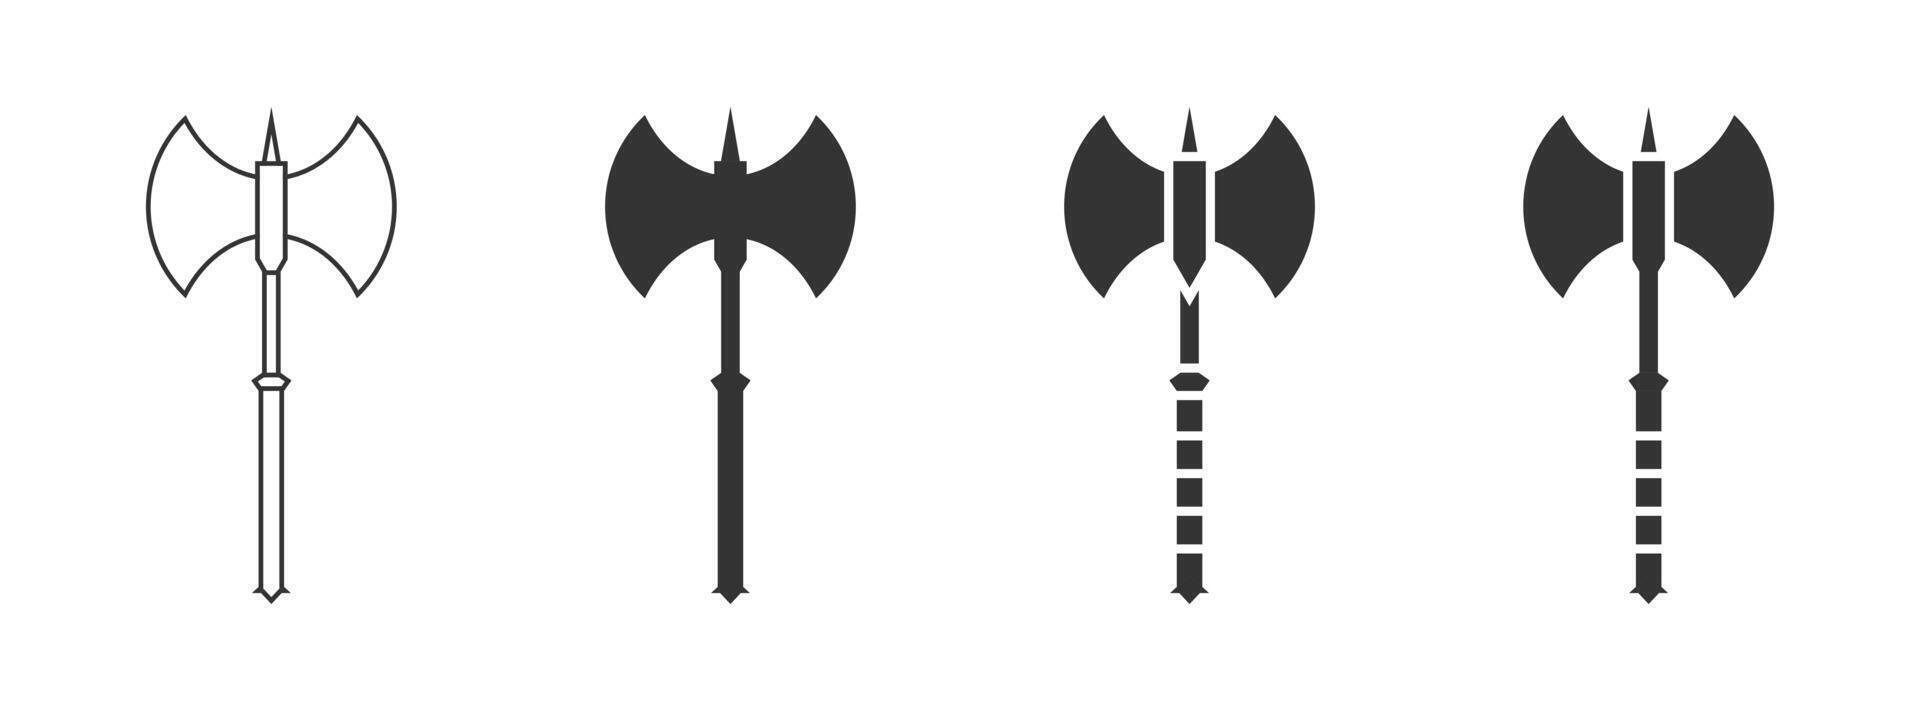 Battleaxe icon isolated on a white background. Vector illustration.